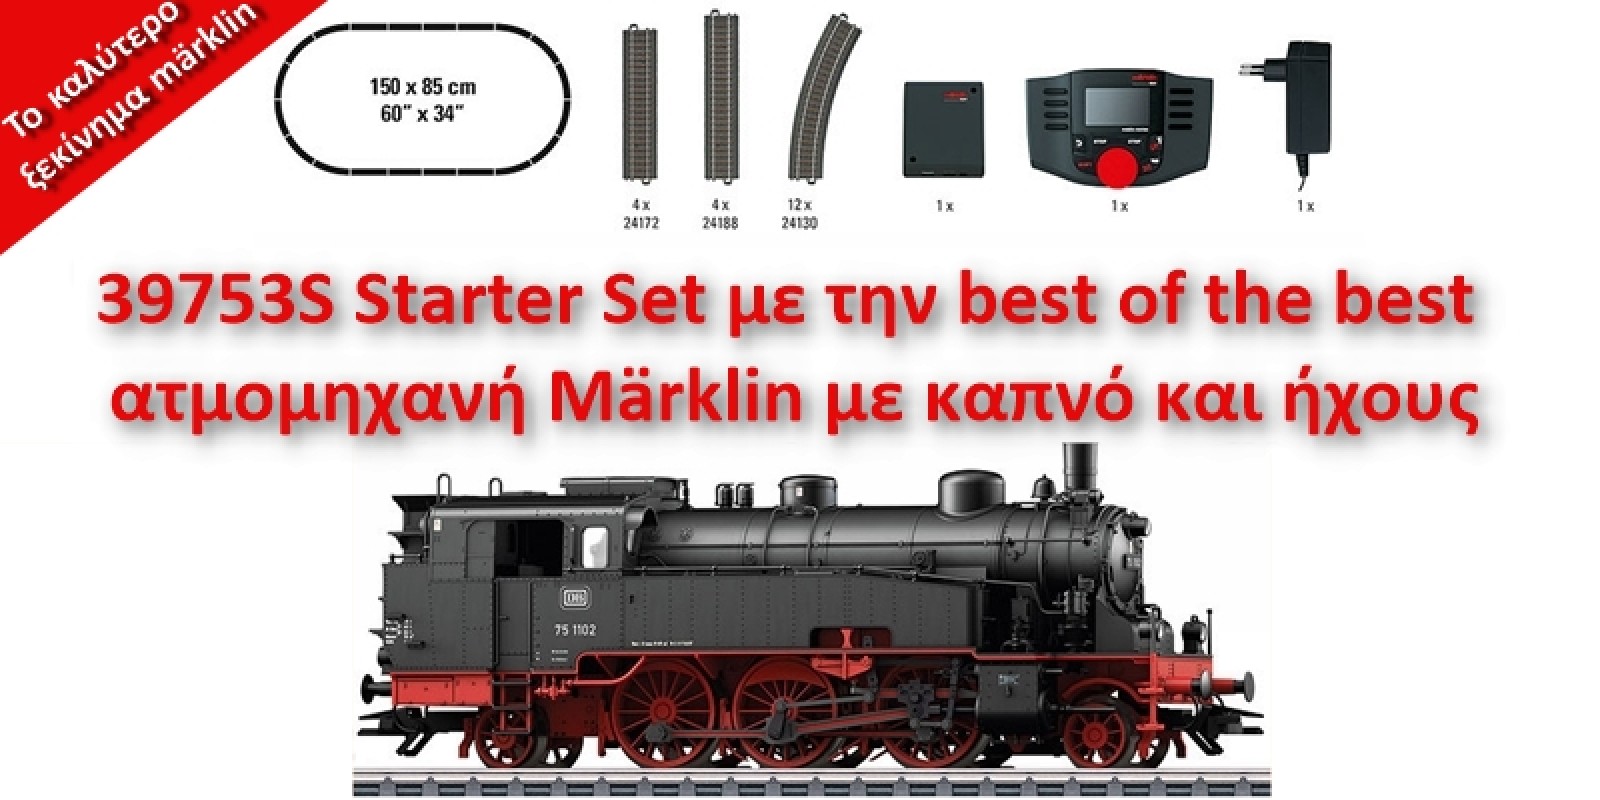 39753S  Digital Starter Set consisting of 39753 plus Mobile Station 2 plus C-track for an oval